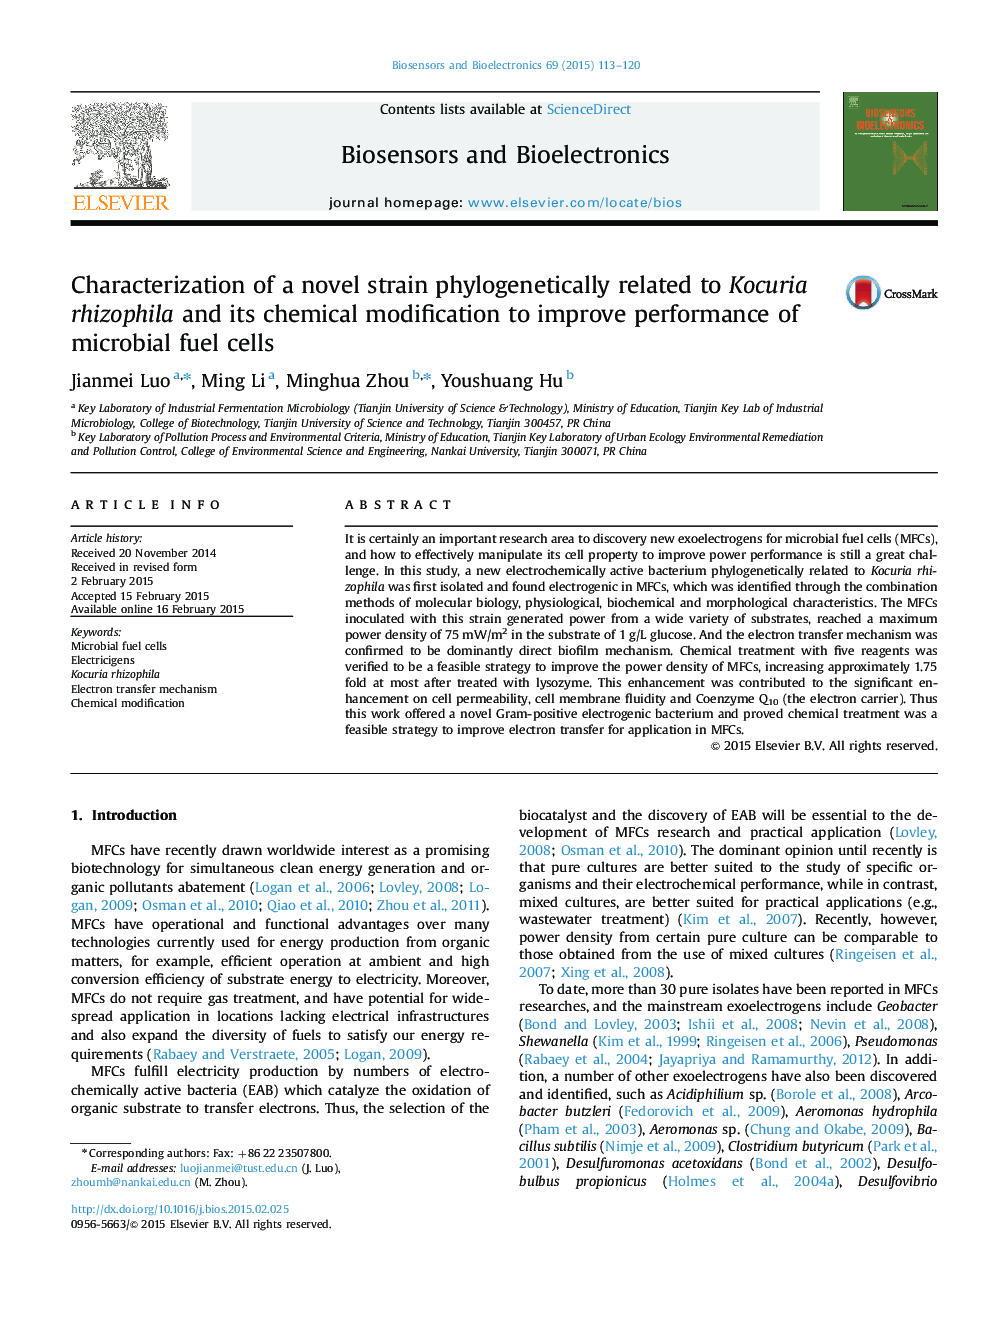 Characterization of a novel strain phylogenetically related to Kocuria rhizophila and its chemical modification to improve performance of microbial fuel cells